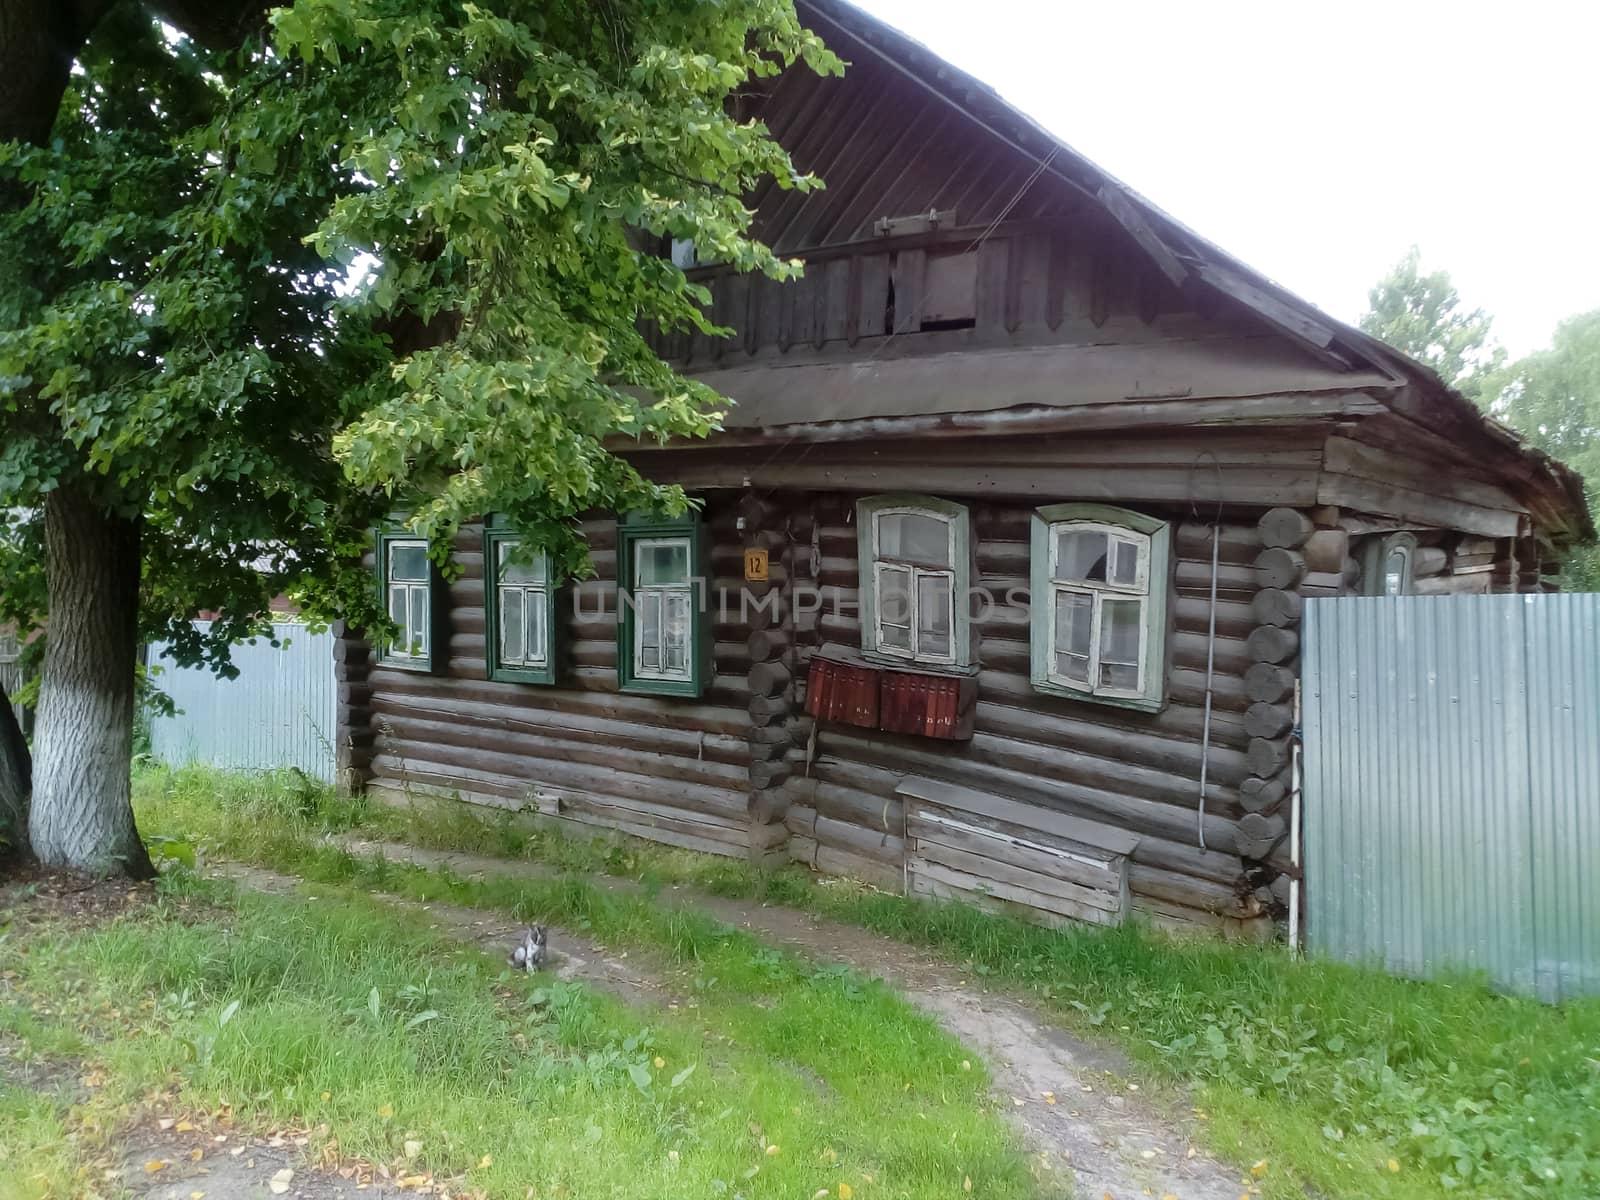 A rustic wooden house and a clearing of green grass in front of it.